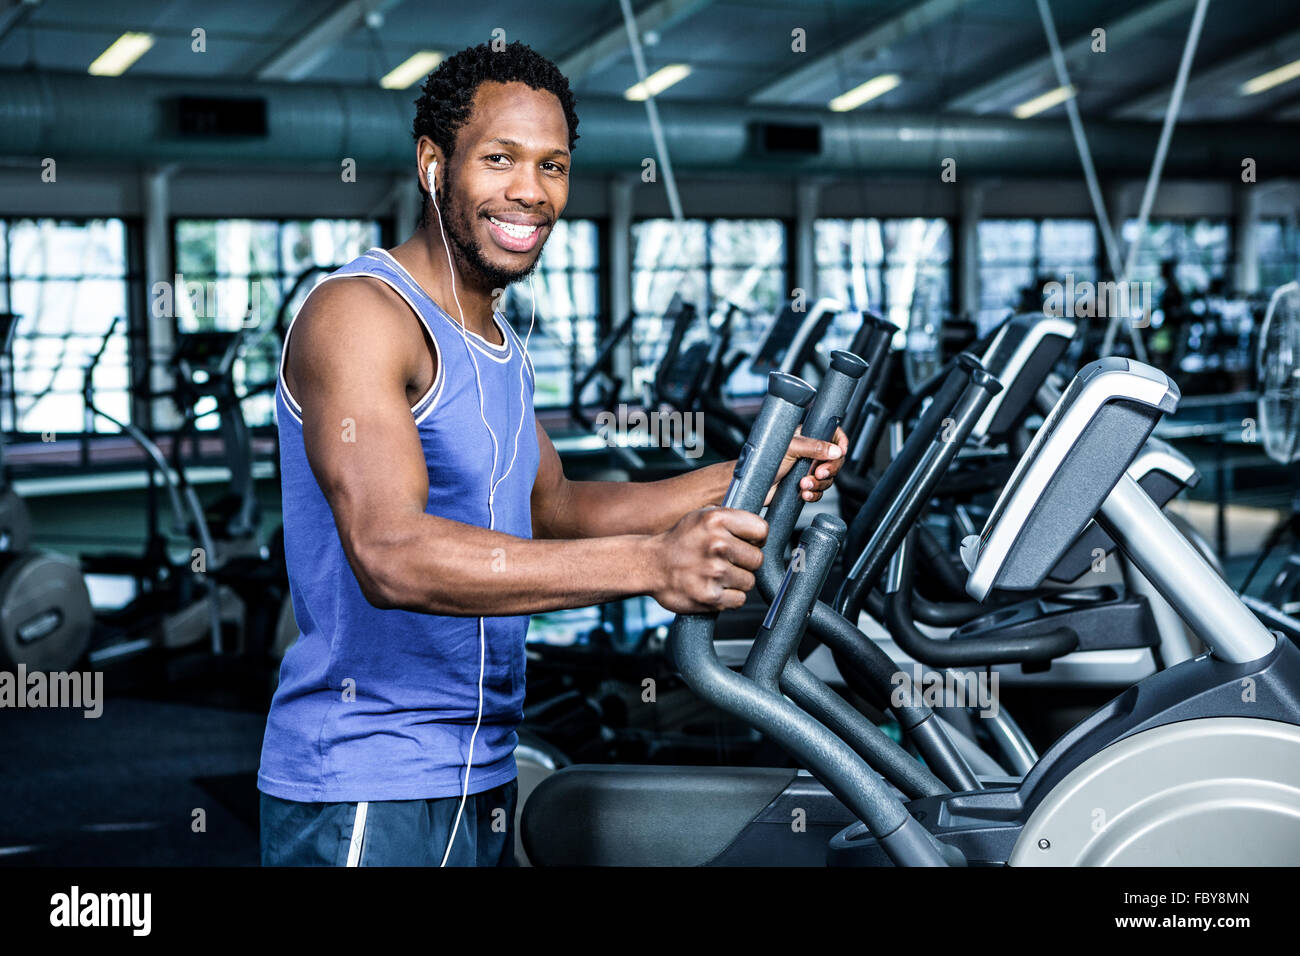 Smiling man working out with headphones on Stock Photo